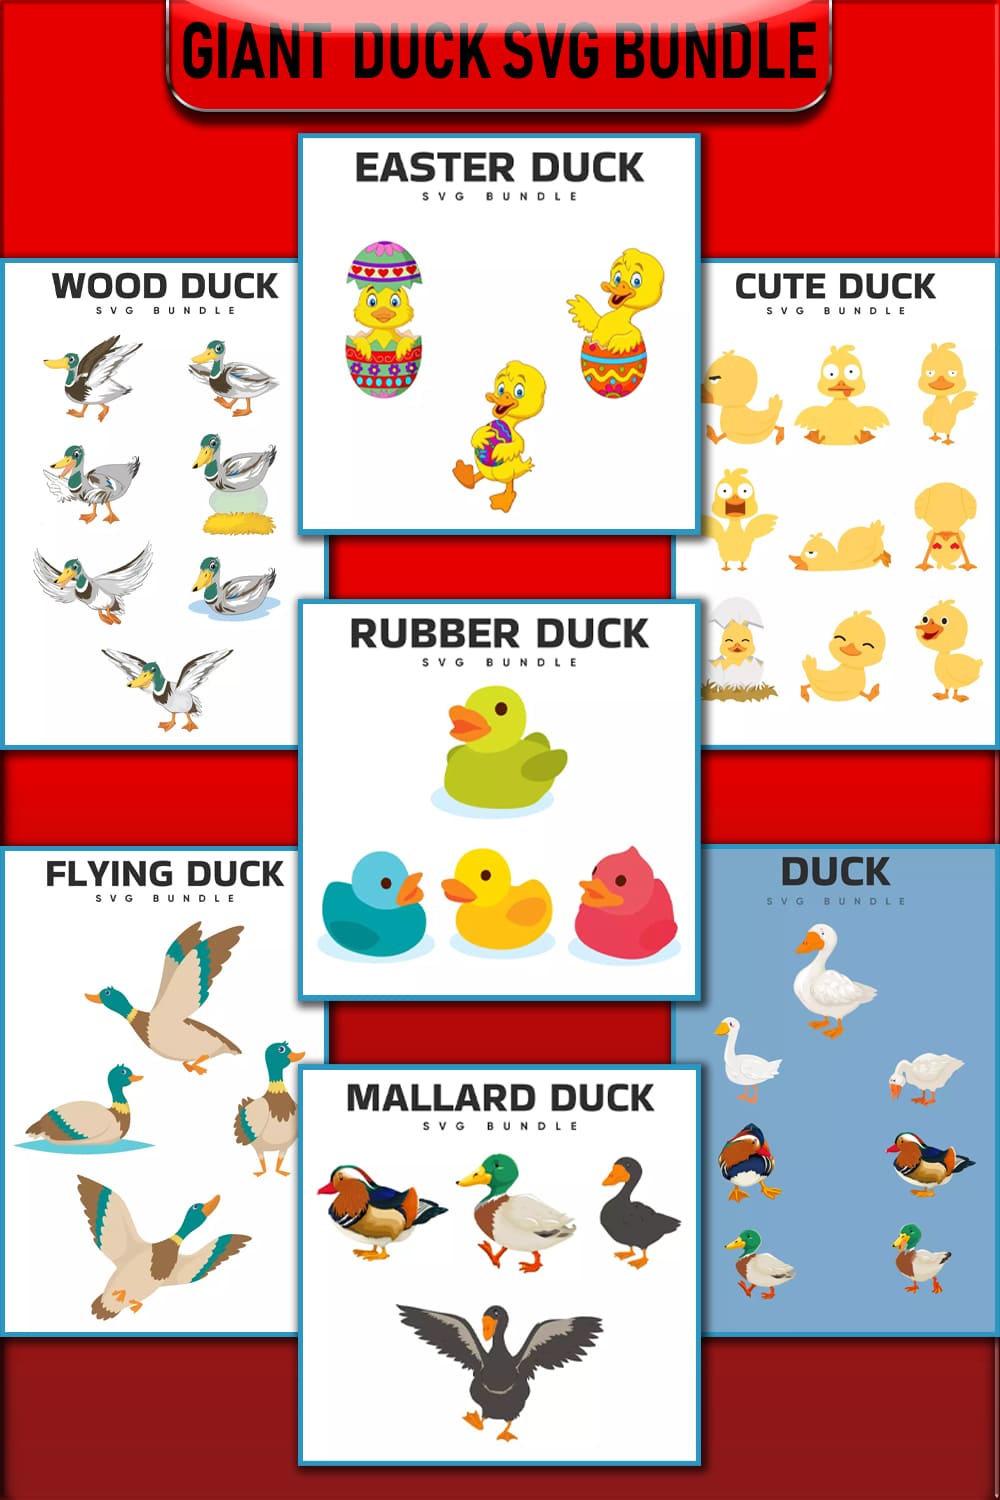 Bunch of different types of ducks and ducks.